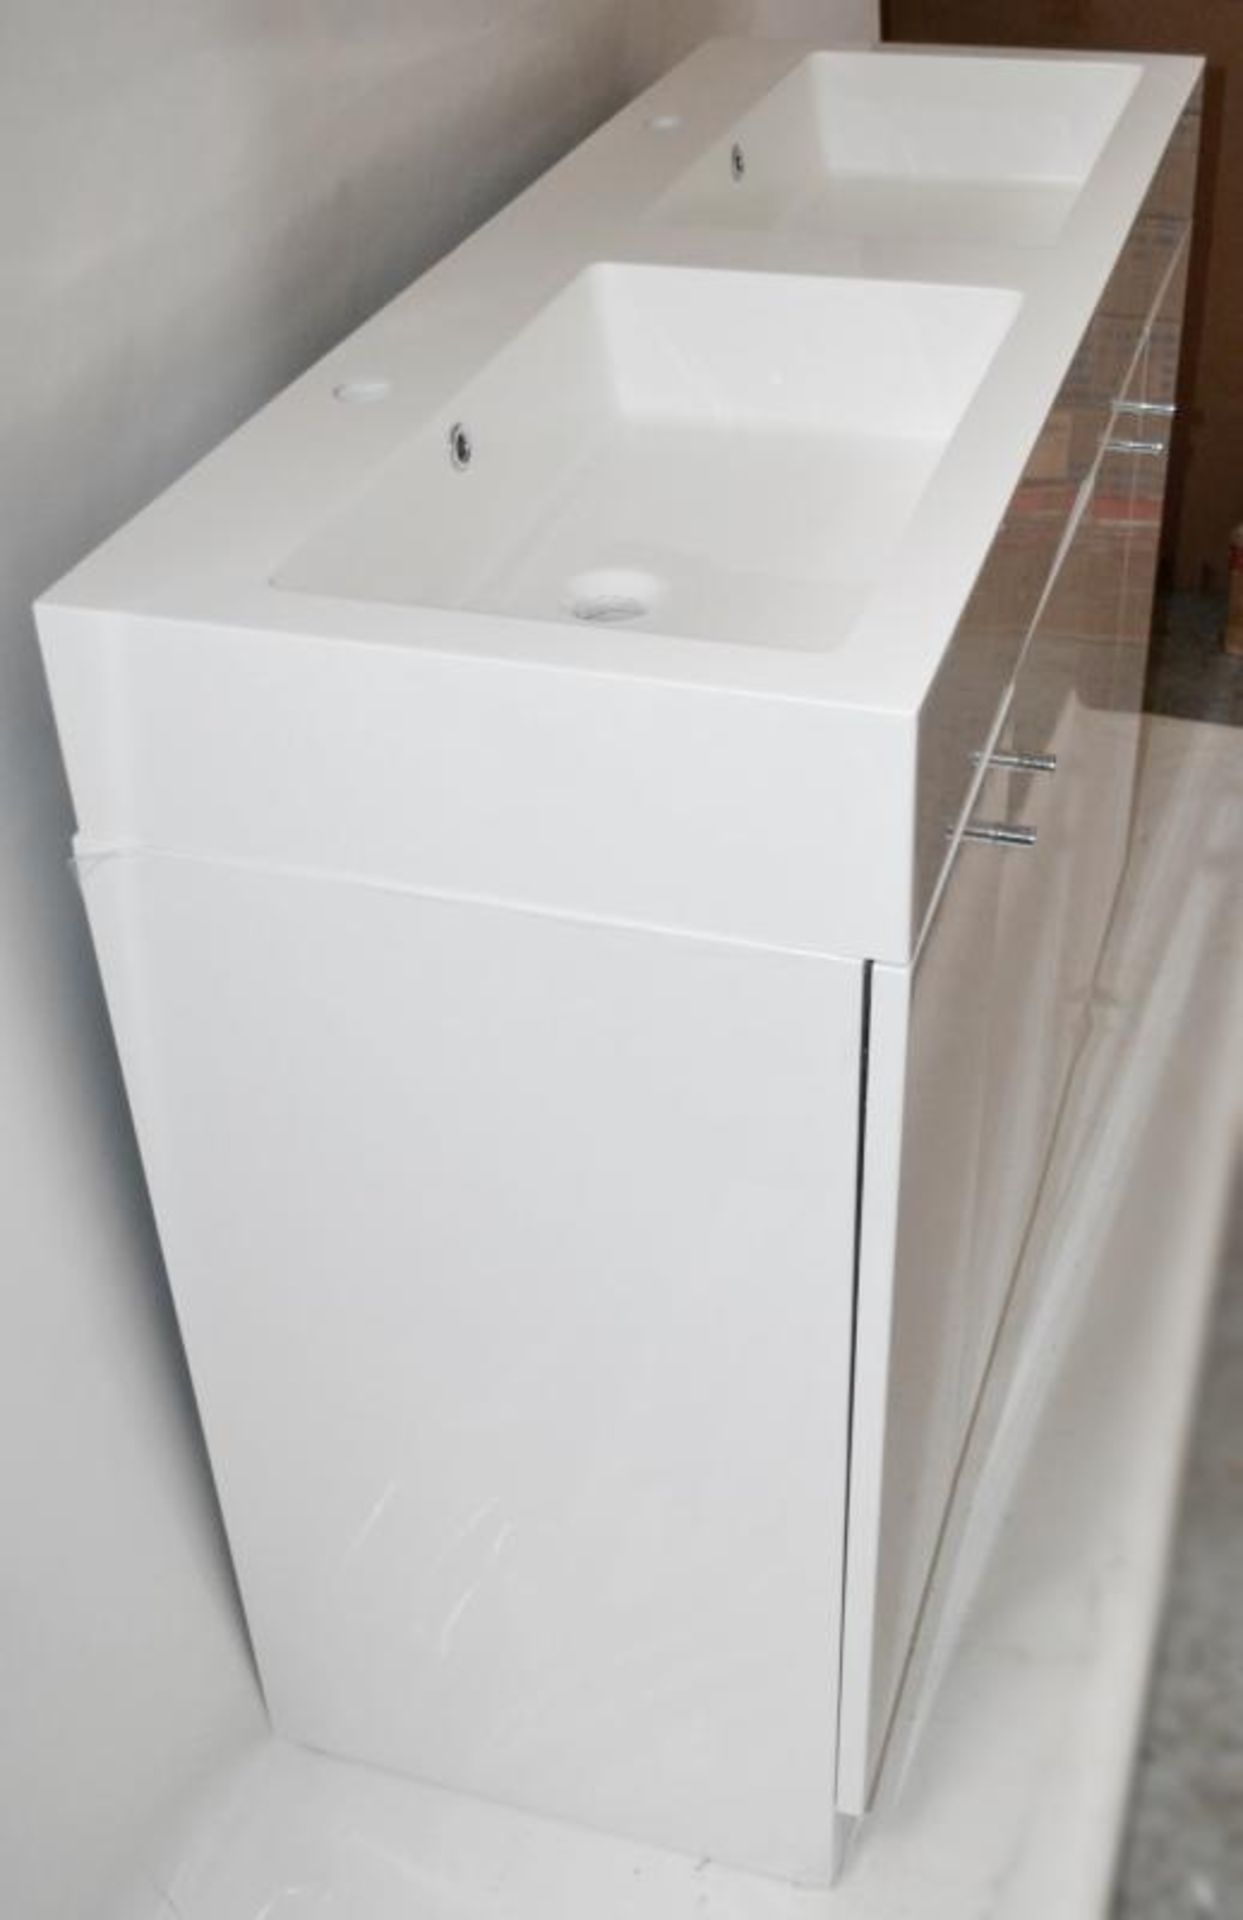 1 x Gloss White 1200mm 4-Door Double Basin Freestanding Bathroom Cabinet - New & Boxed Stock - CL307 - Image 6 of 7